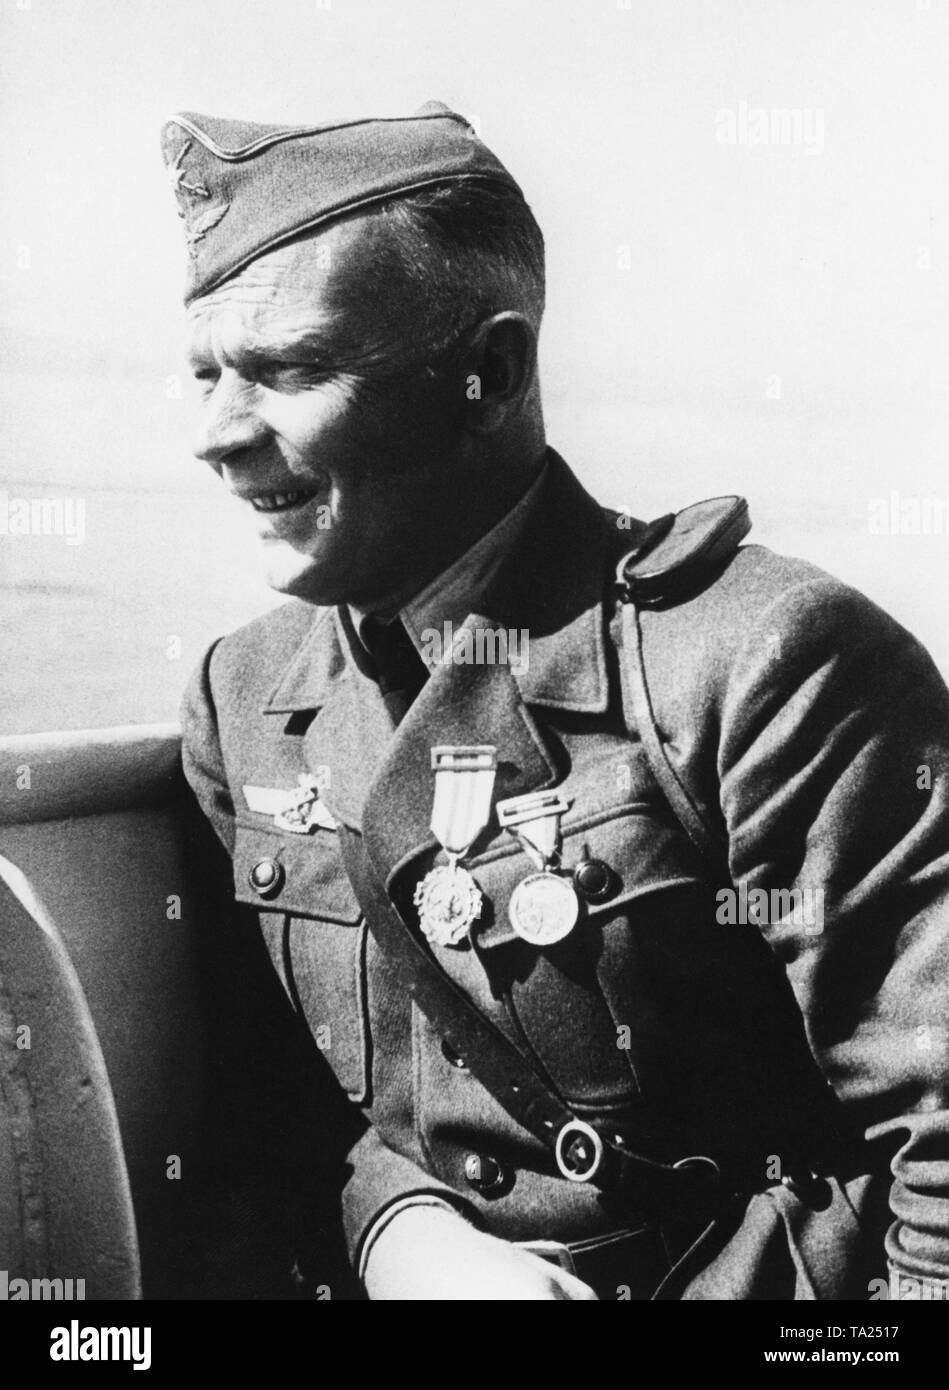 Undated photo of the commander of the Condor Legion, Major General Wolfram von Richthofen in the Spanish Civil War in Spain, 1939. Richthofen is wearing Spanish orders on his left chest: the Medal for the Campaign (Medalla de la Campana) (right) and the Military Medal (left, Medalla Militar). On the right side of his chest, he is wearing the Spanish aviator badge. Stock Photo